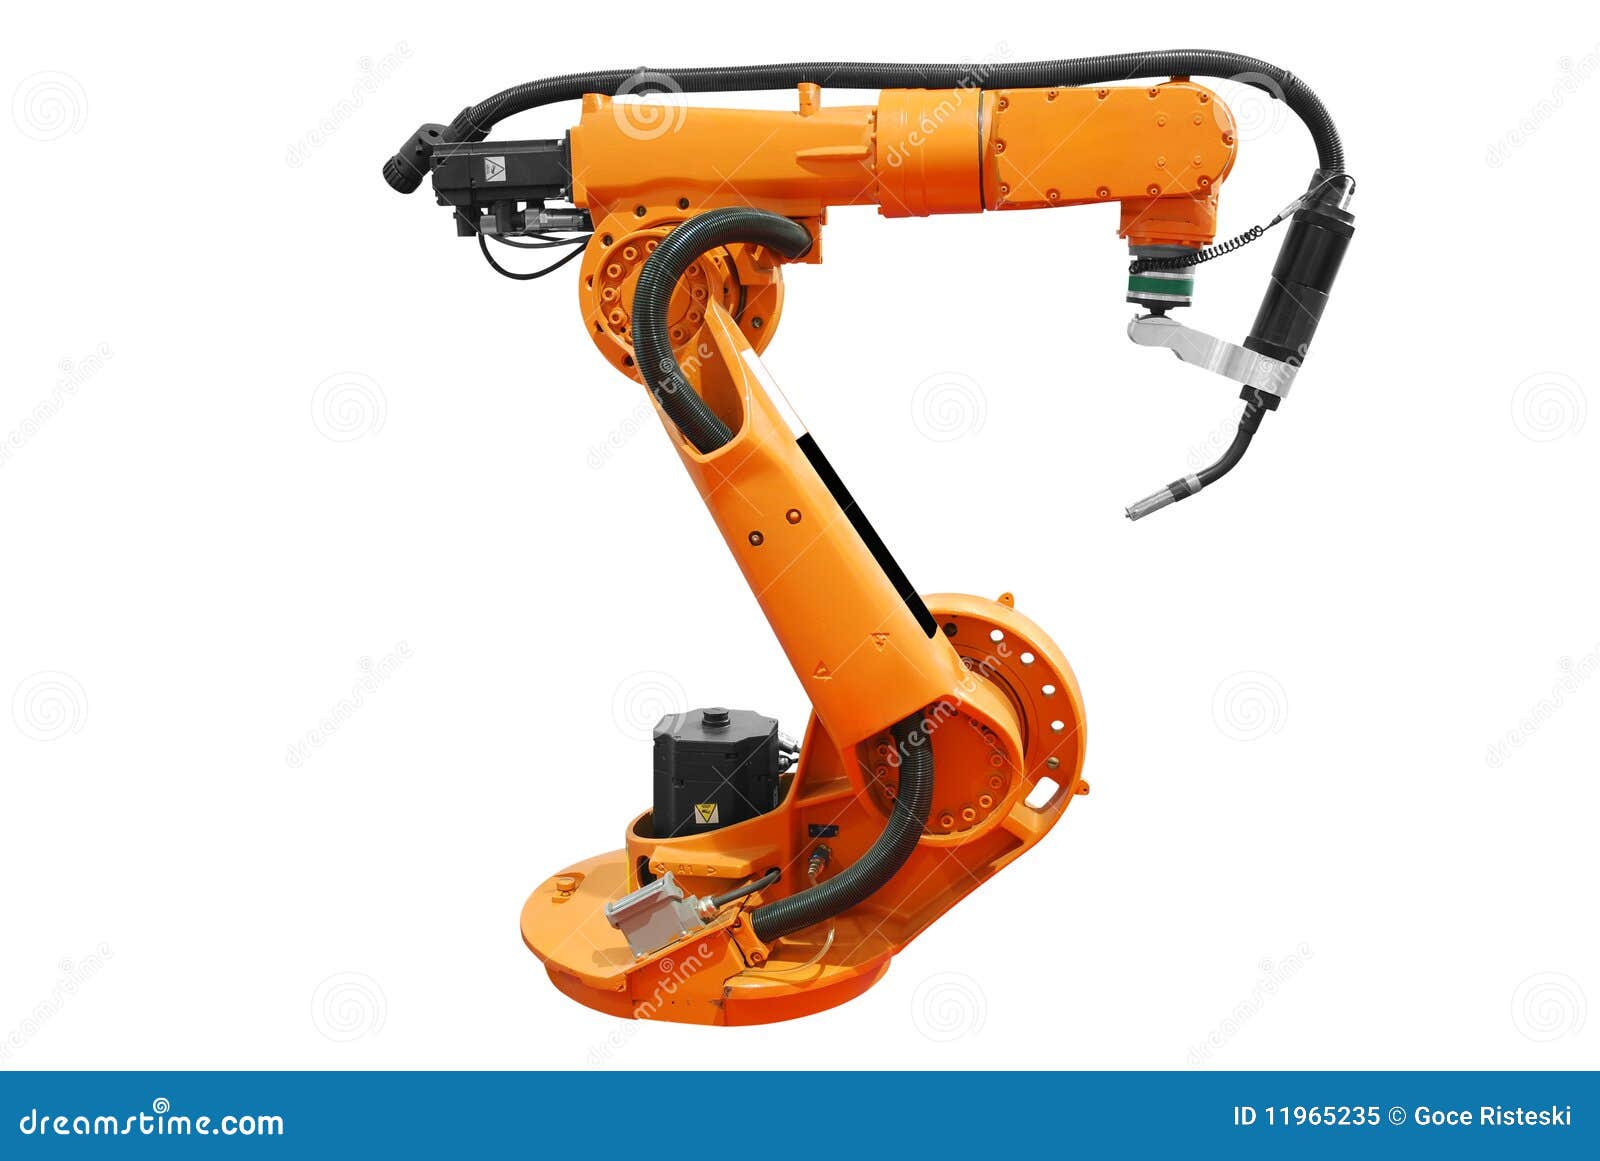 industrial robot clipart - photo #25